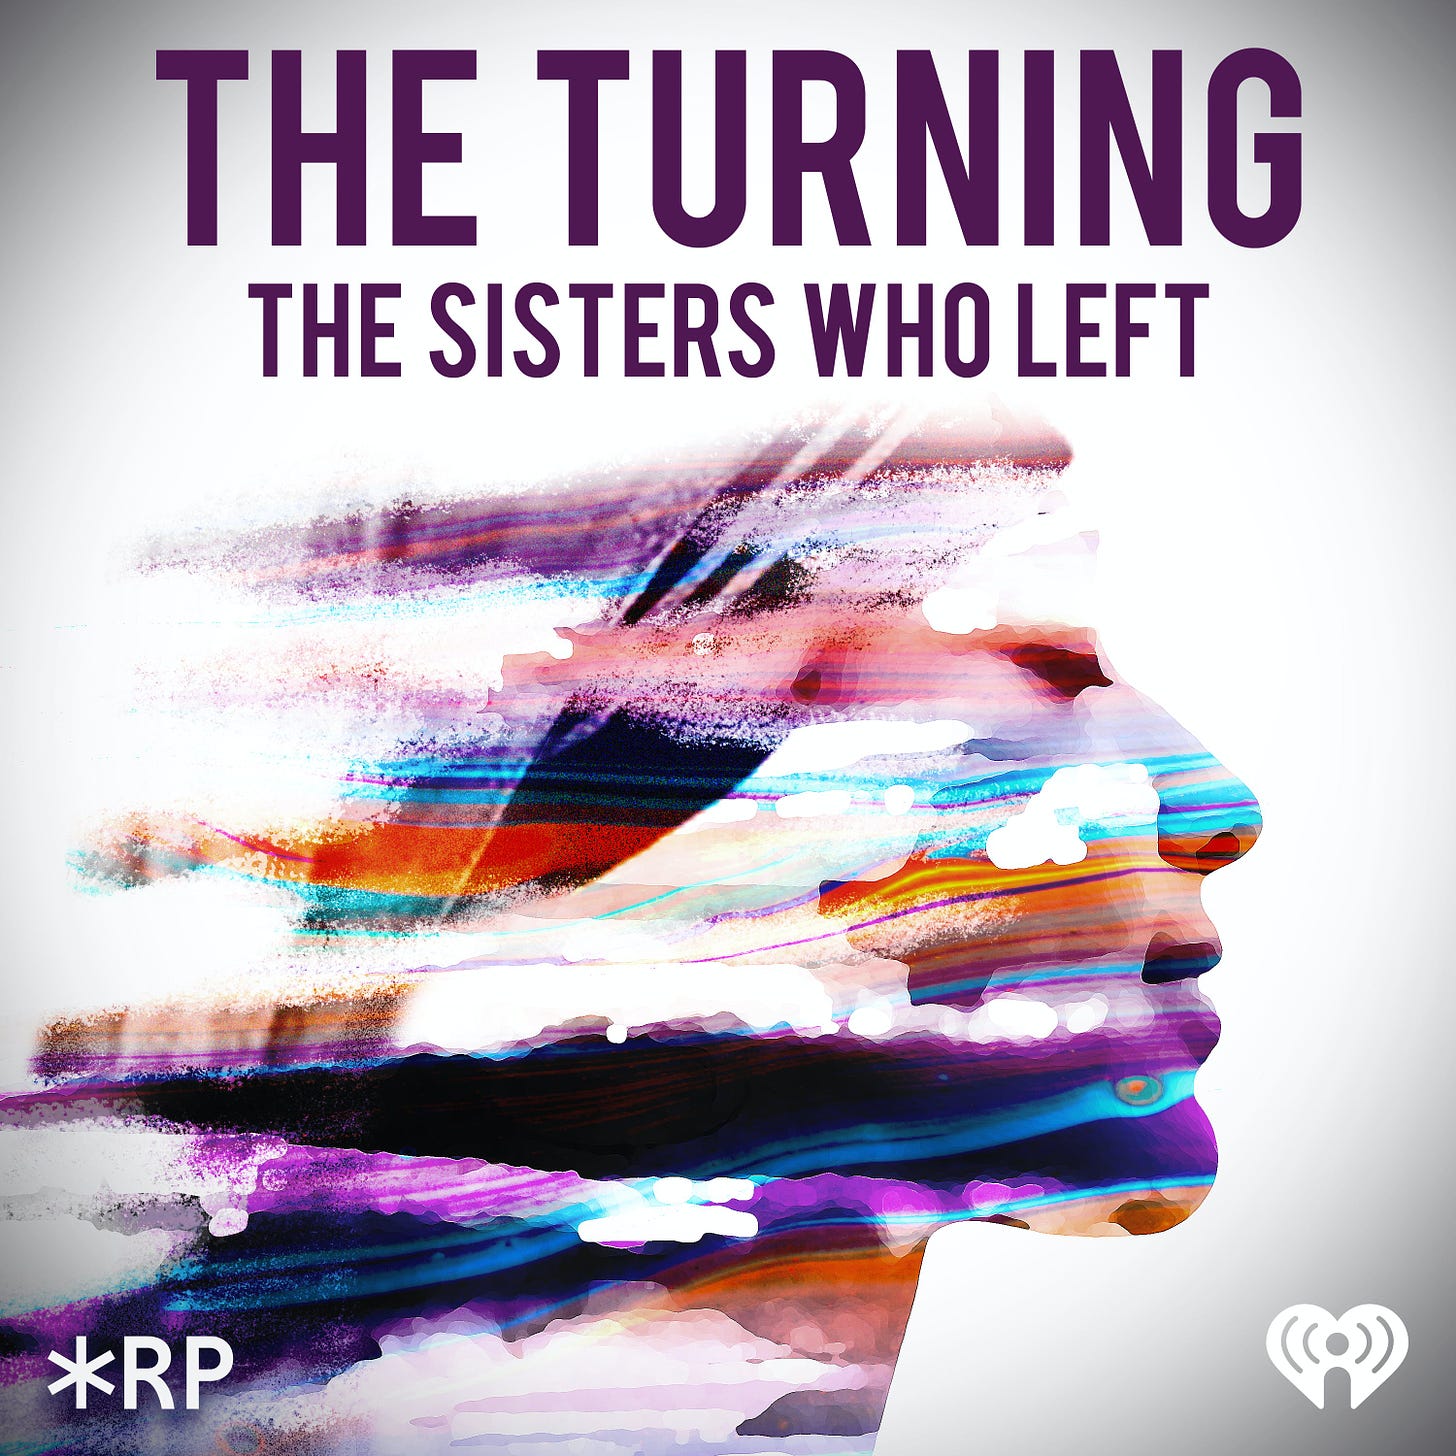 The Turning: The Sisters Who Left